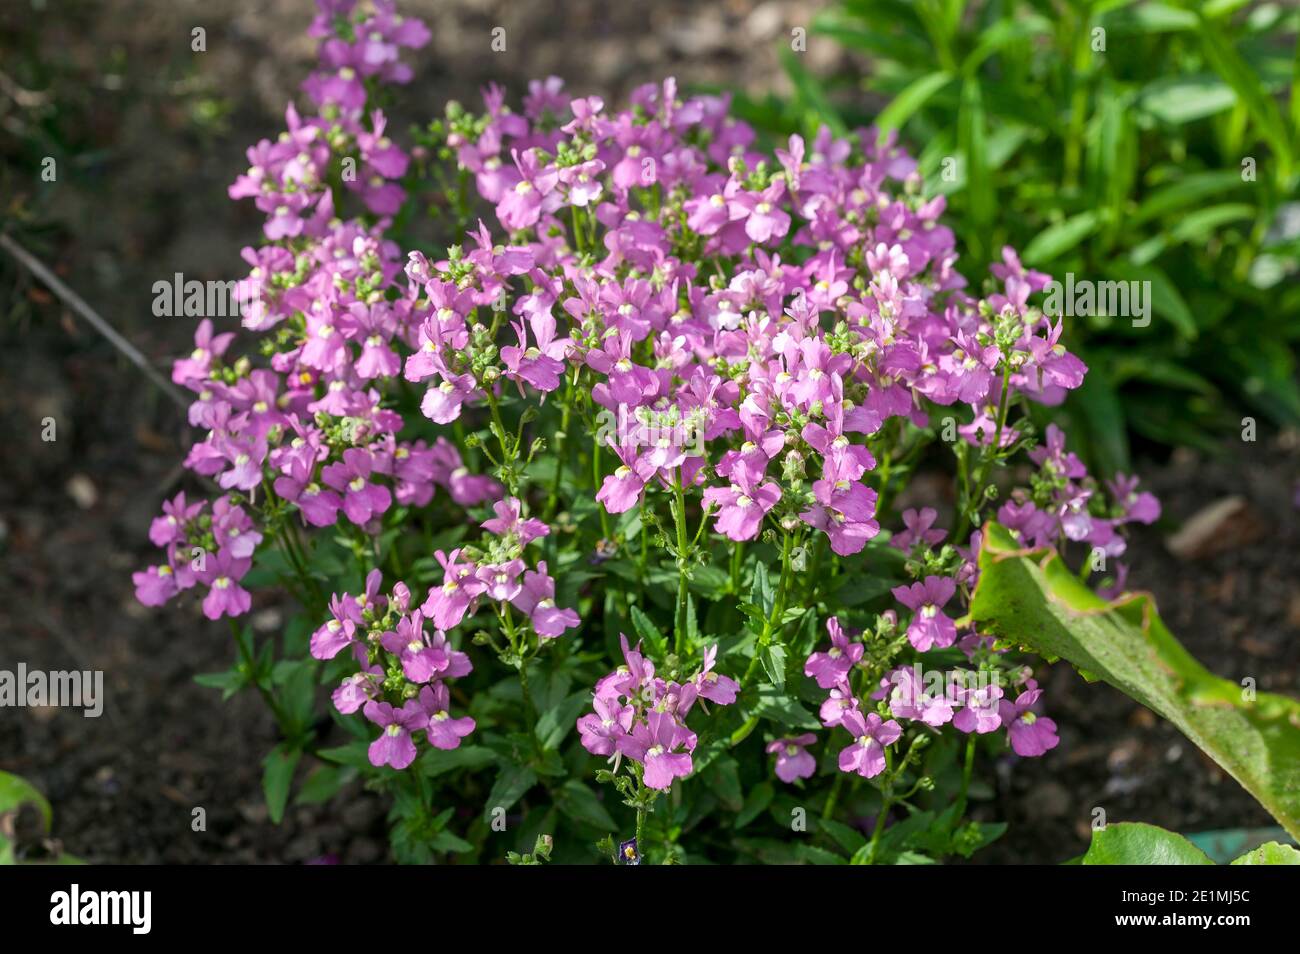 Nemesia 'Fleuron' a summer flowering plant with a pink blue summertime flower which open in May to September, stock photo image Stock Photo